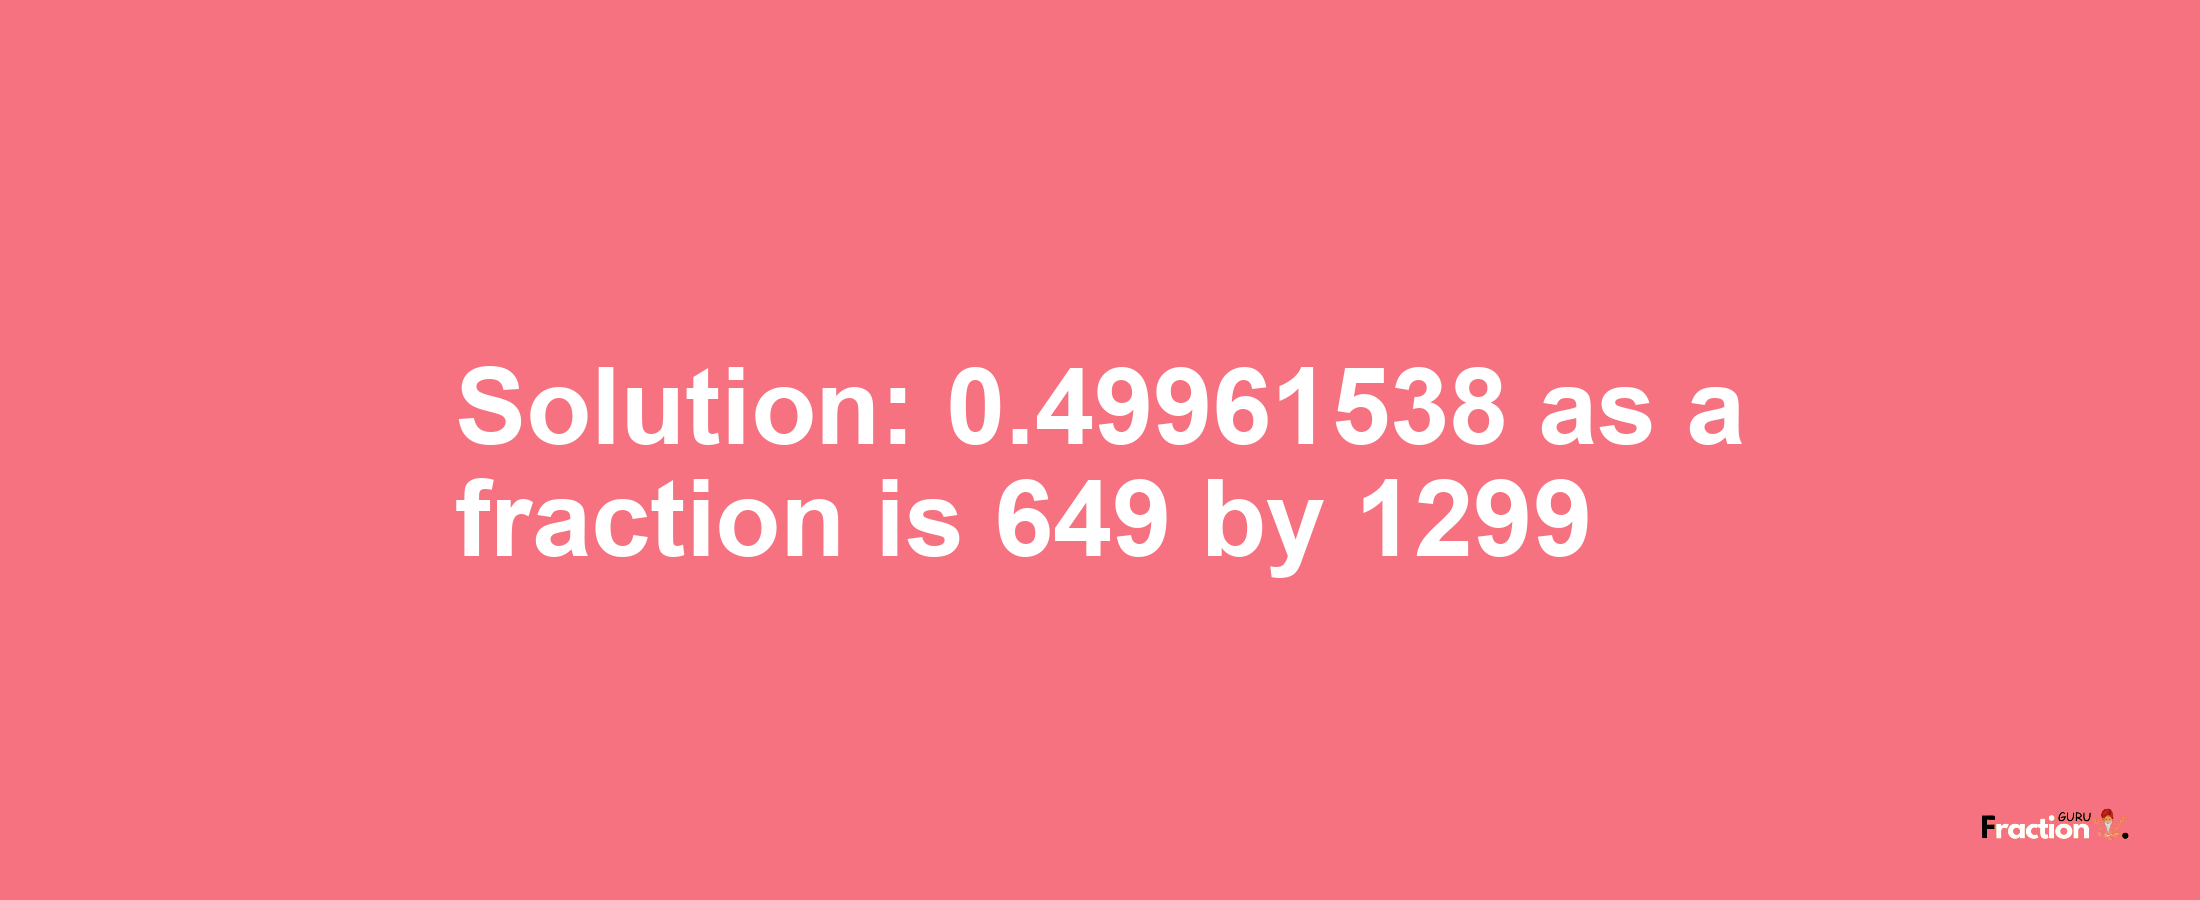 Solution:0.49961538 as a fraction is 649/1299